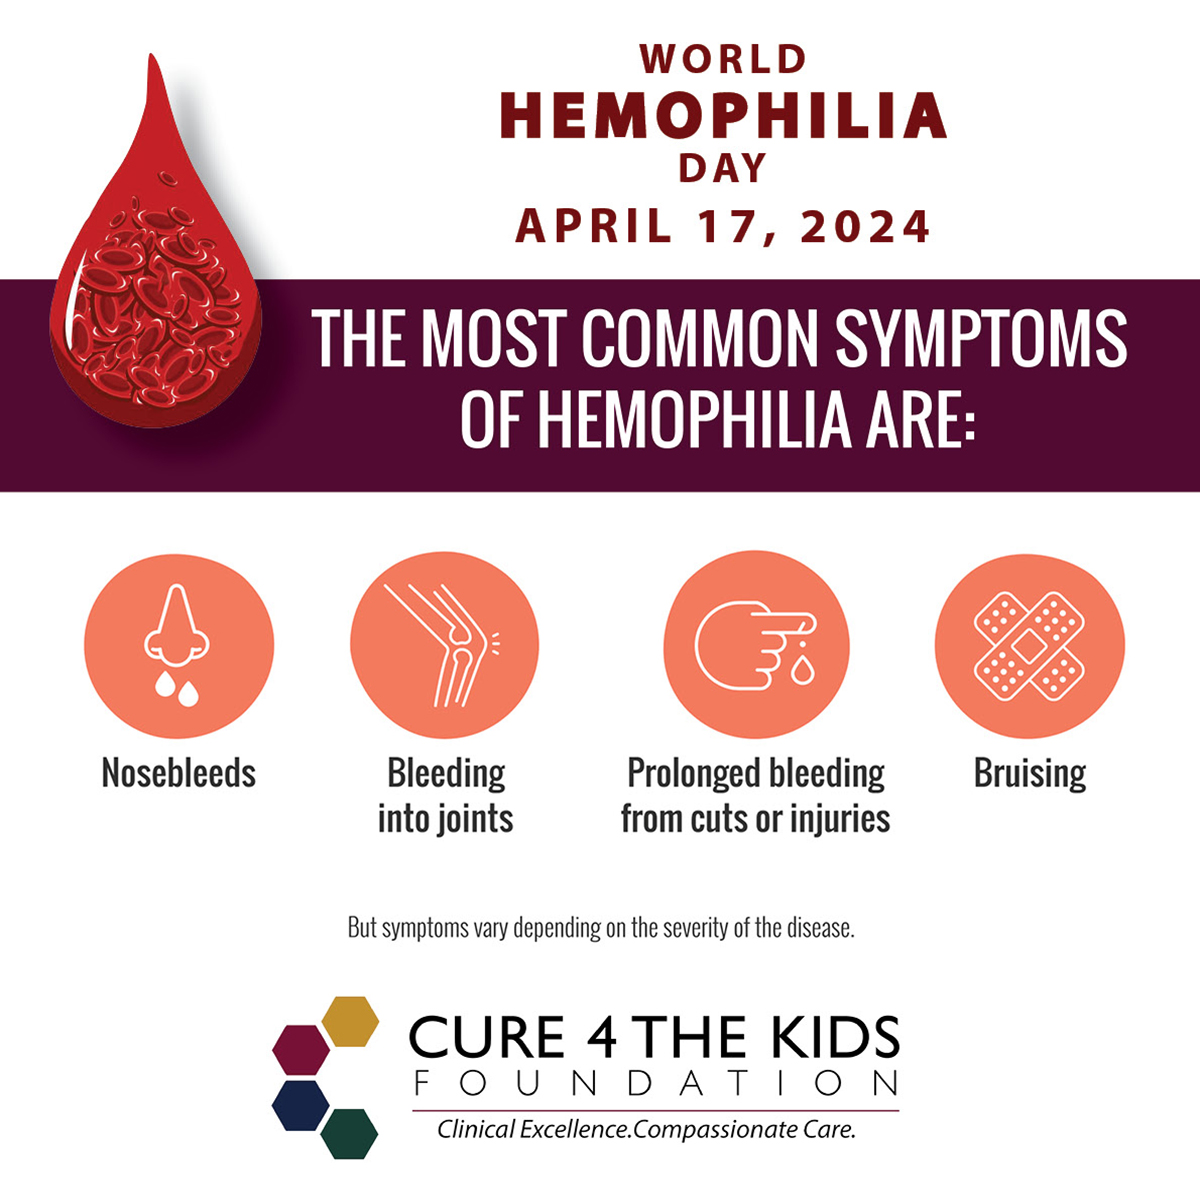 Make sure you know the most common symptoms of hemophilia - nosebleeds, bleeding in joints, prolonged bleeding from cuts or injuries, and bruising. #WorldHemophiliaDay #Cure4TheKidsFoundation #BleedingDisorders #RareDiseases